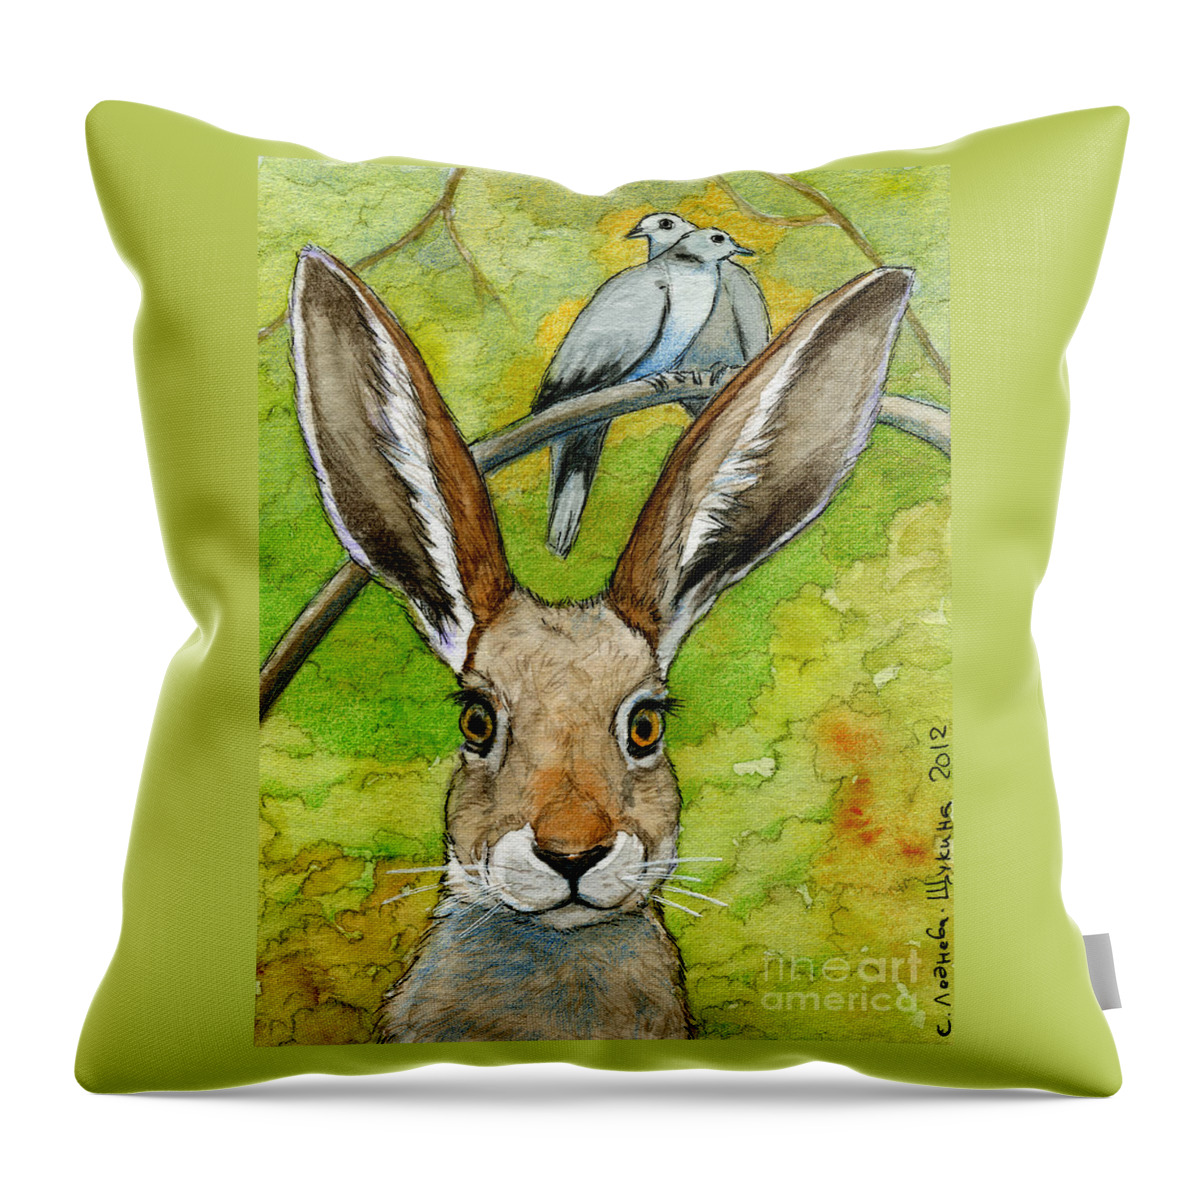 Animal Throw Pillow featuring the painting Funny bunnies-thoughts of love 836 by Svetlana Ledneva-Schukina